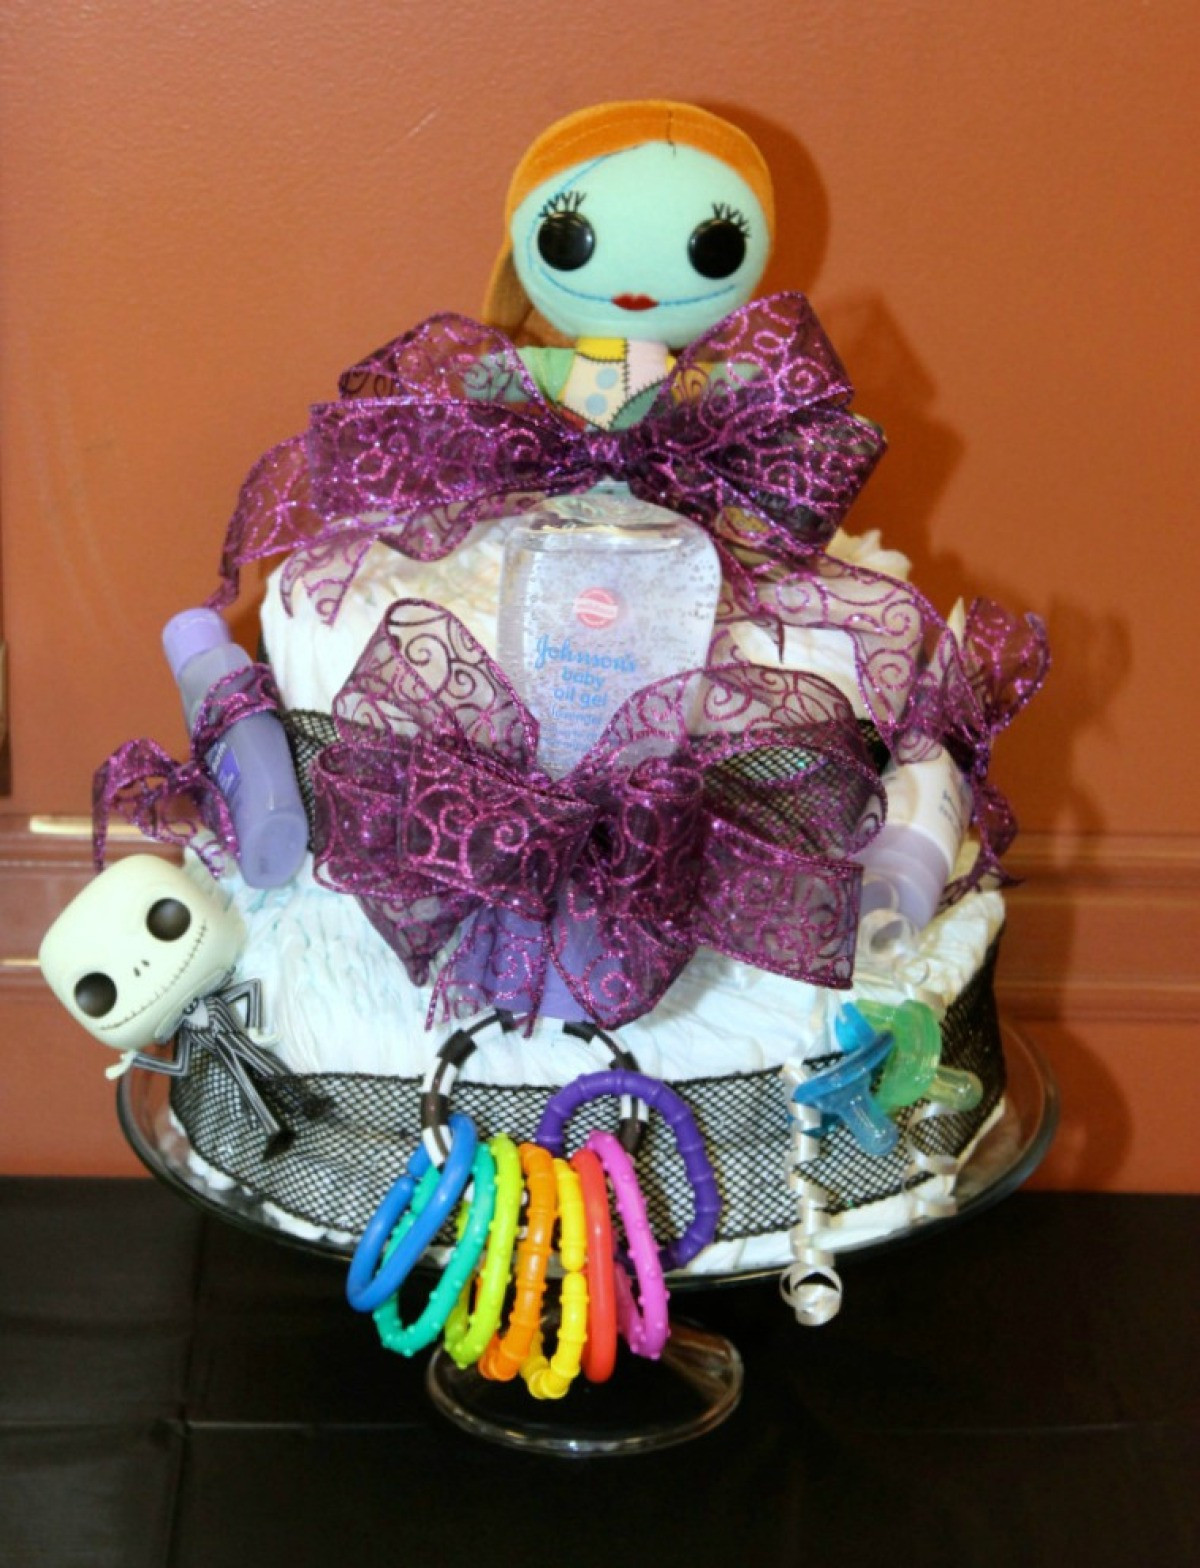 Nightmare Before Christmas Baby Shower Party Ideas
 Nightmare Before Christmas Baby Shower Ideas